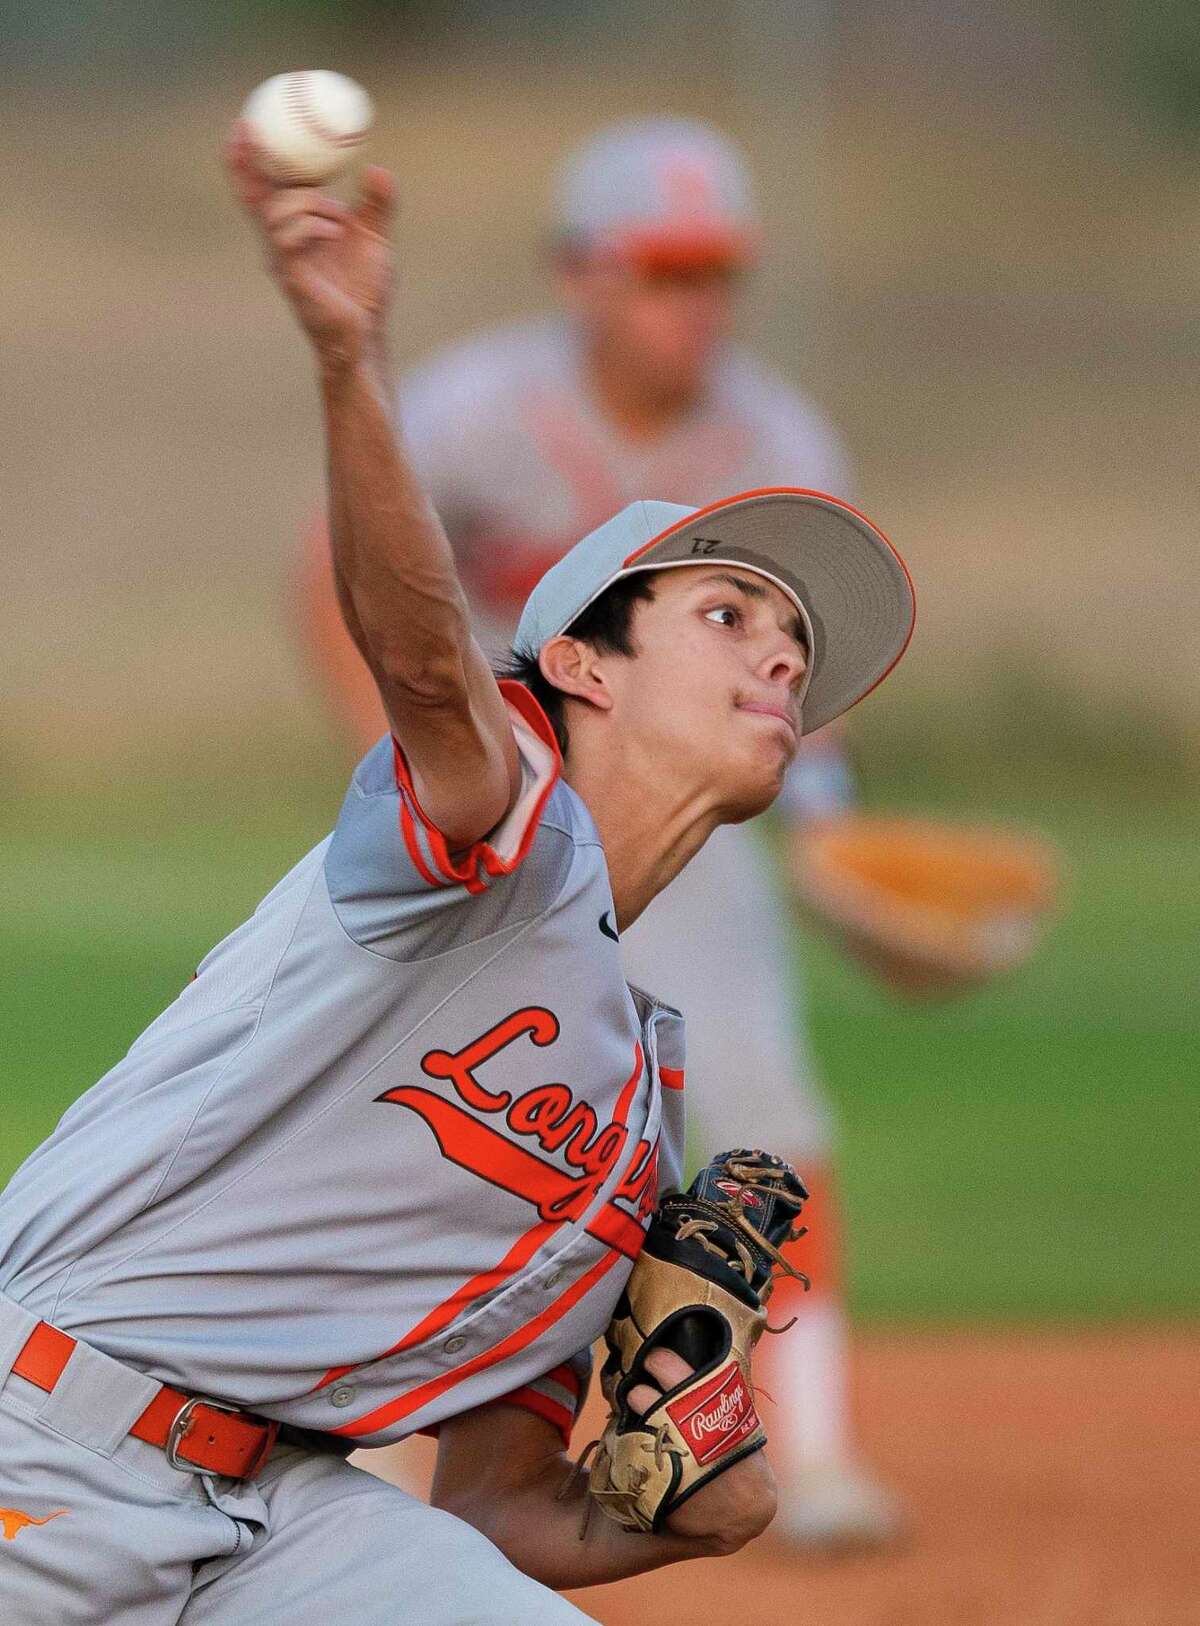 United High School’s Antonio Sanchez has posted a 1.35 ERA with a .188 batting average against on the season.